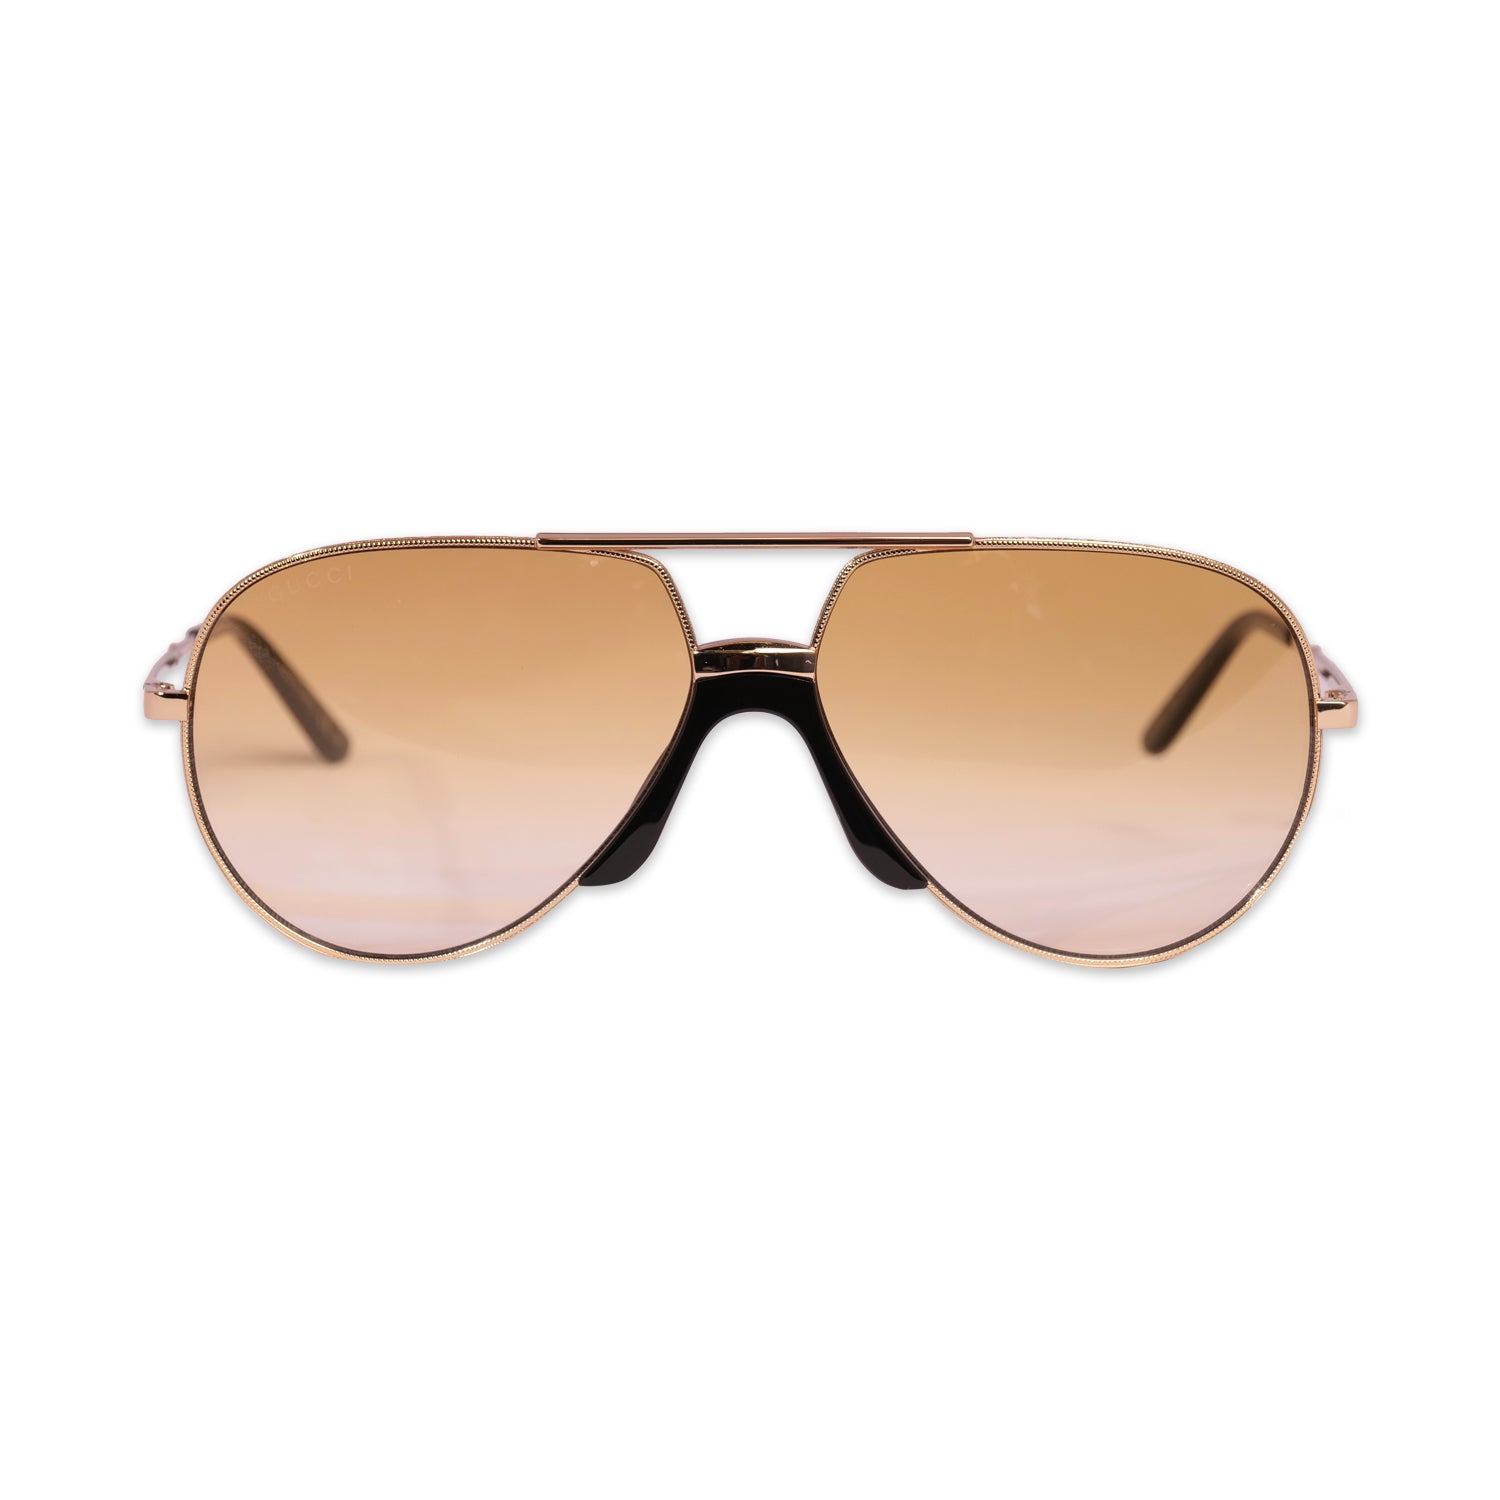 GUCCI METAL SUNGLASSES IN GOLD-YELLOW